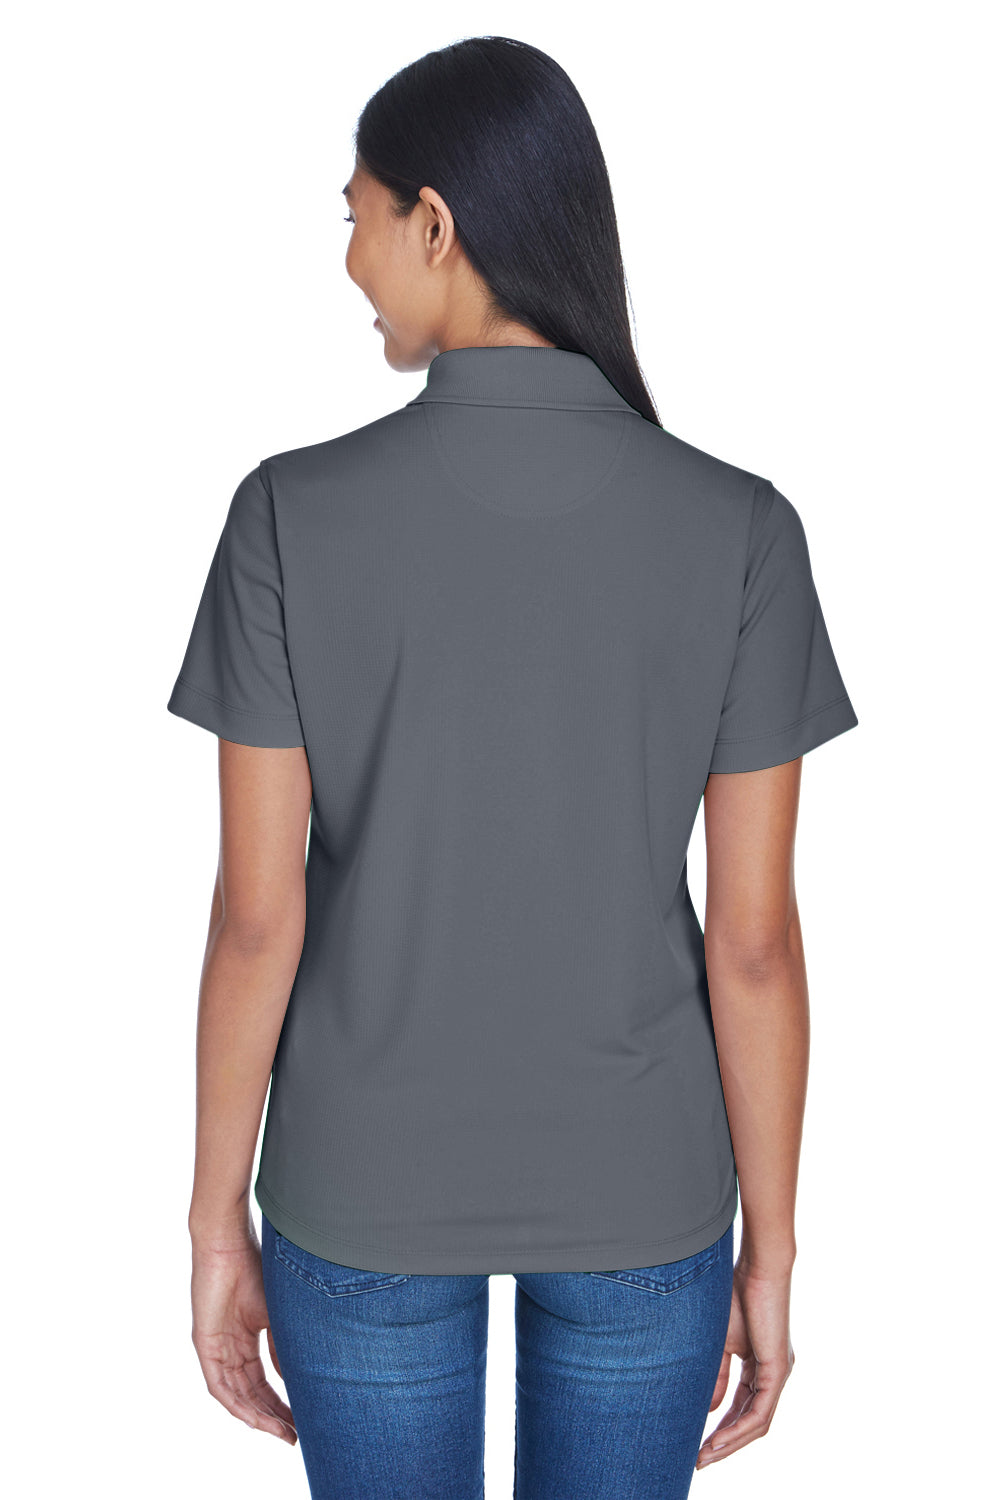 UltraClub 8445L Womens Cool & Dry Performance Moisture Wicking Short Sleeve Polo Shirt Charcoal Grey Back